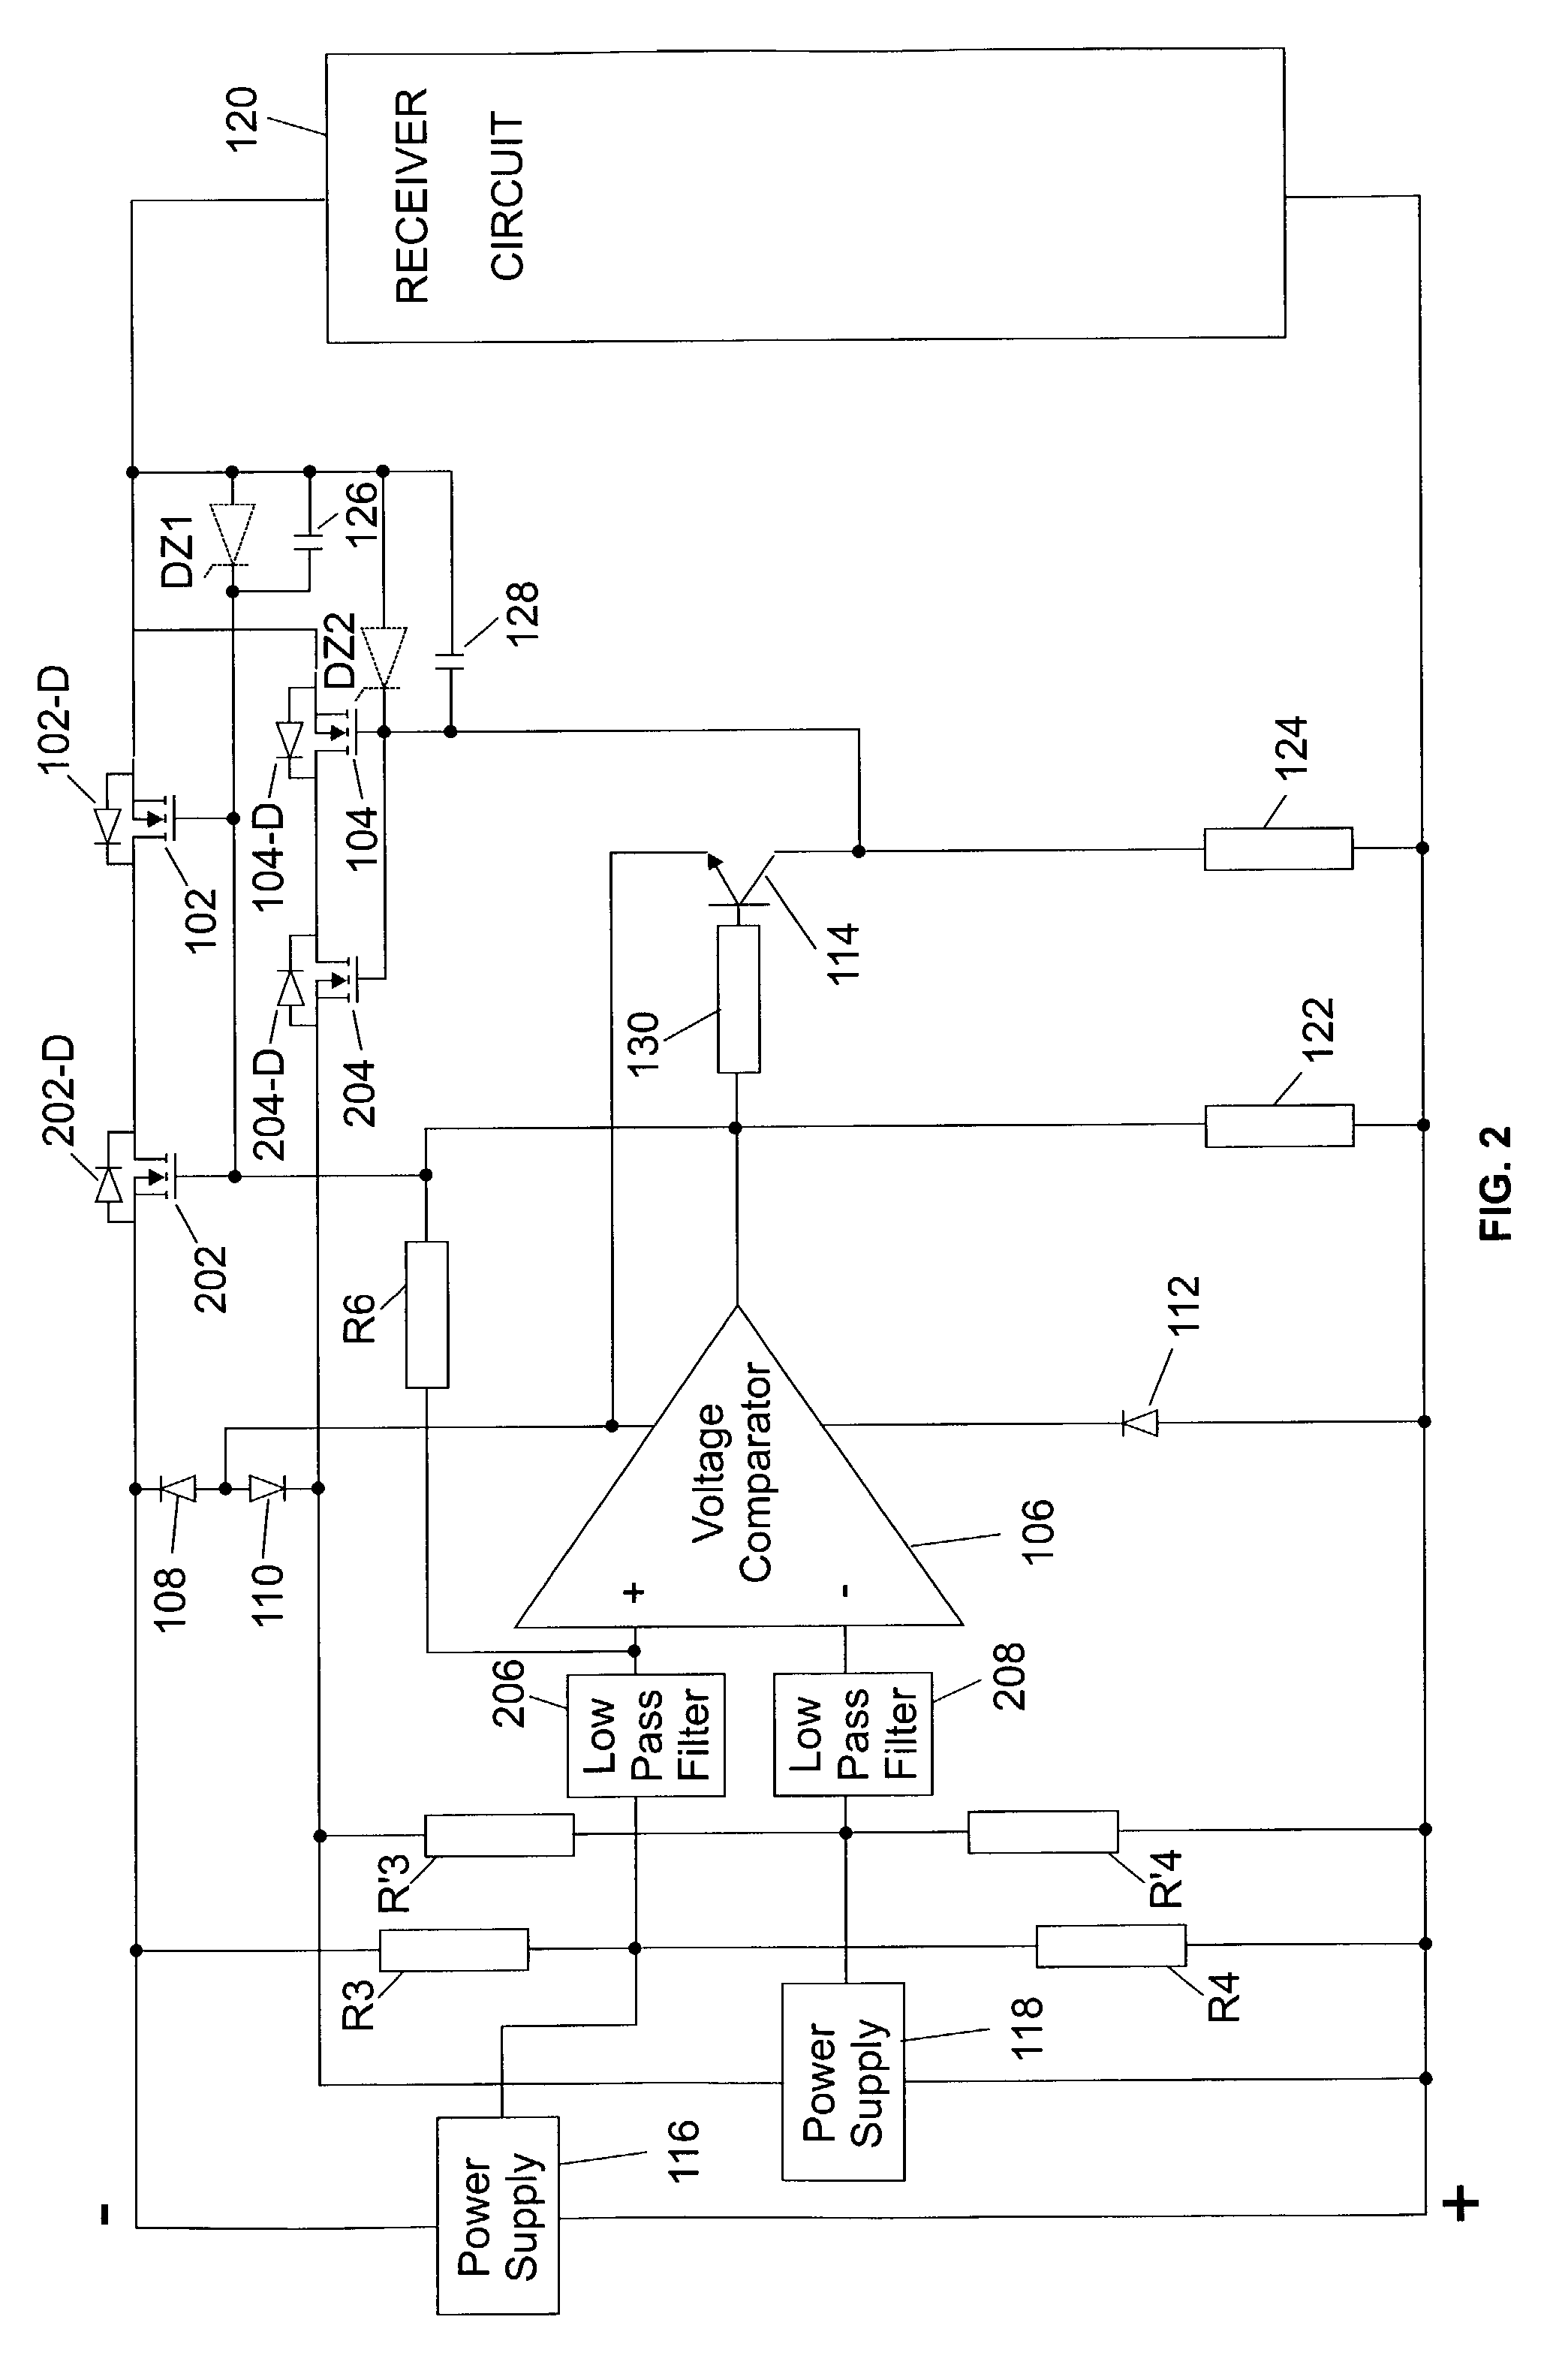 System and method for redundant power supply connection